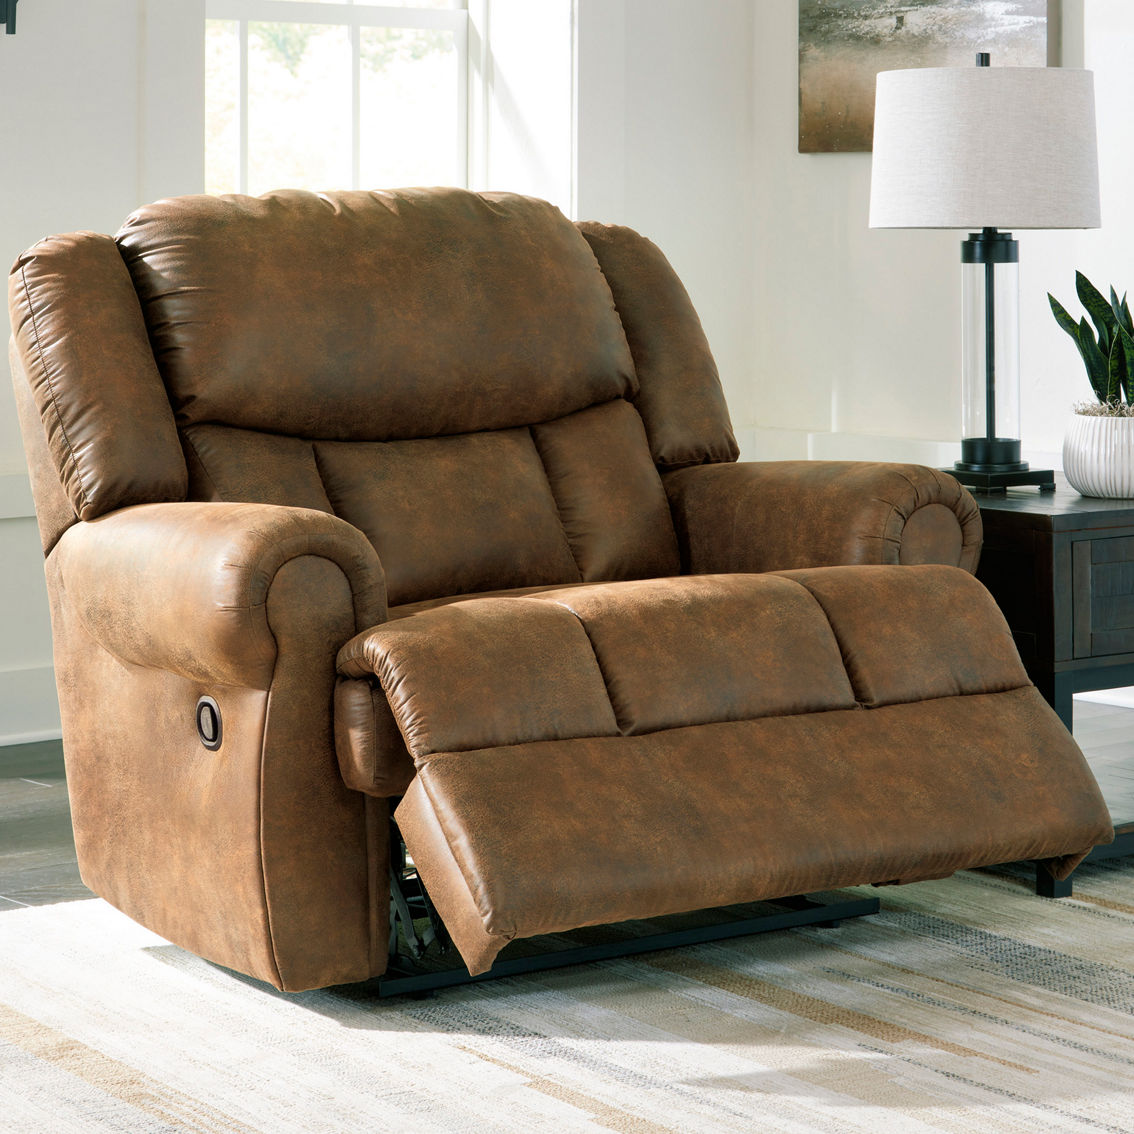 Signature Design by Ashley Boothbay Oversized Recliner - Image 7 of 8